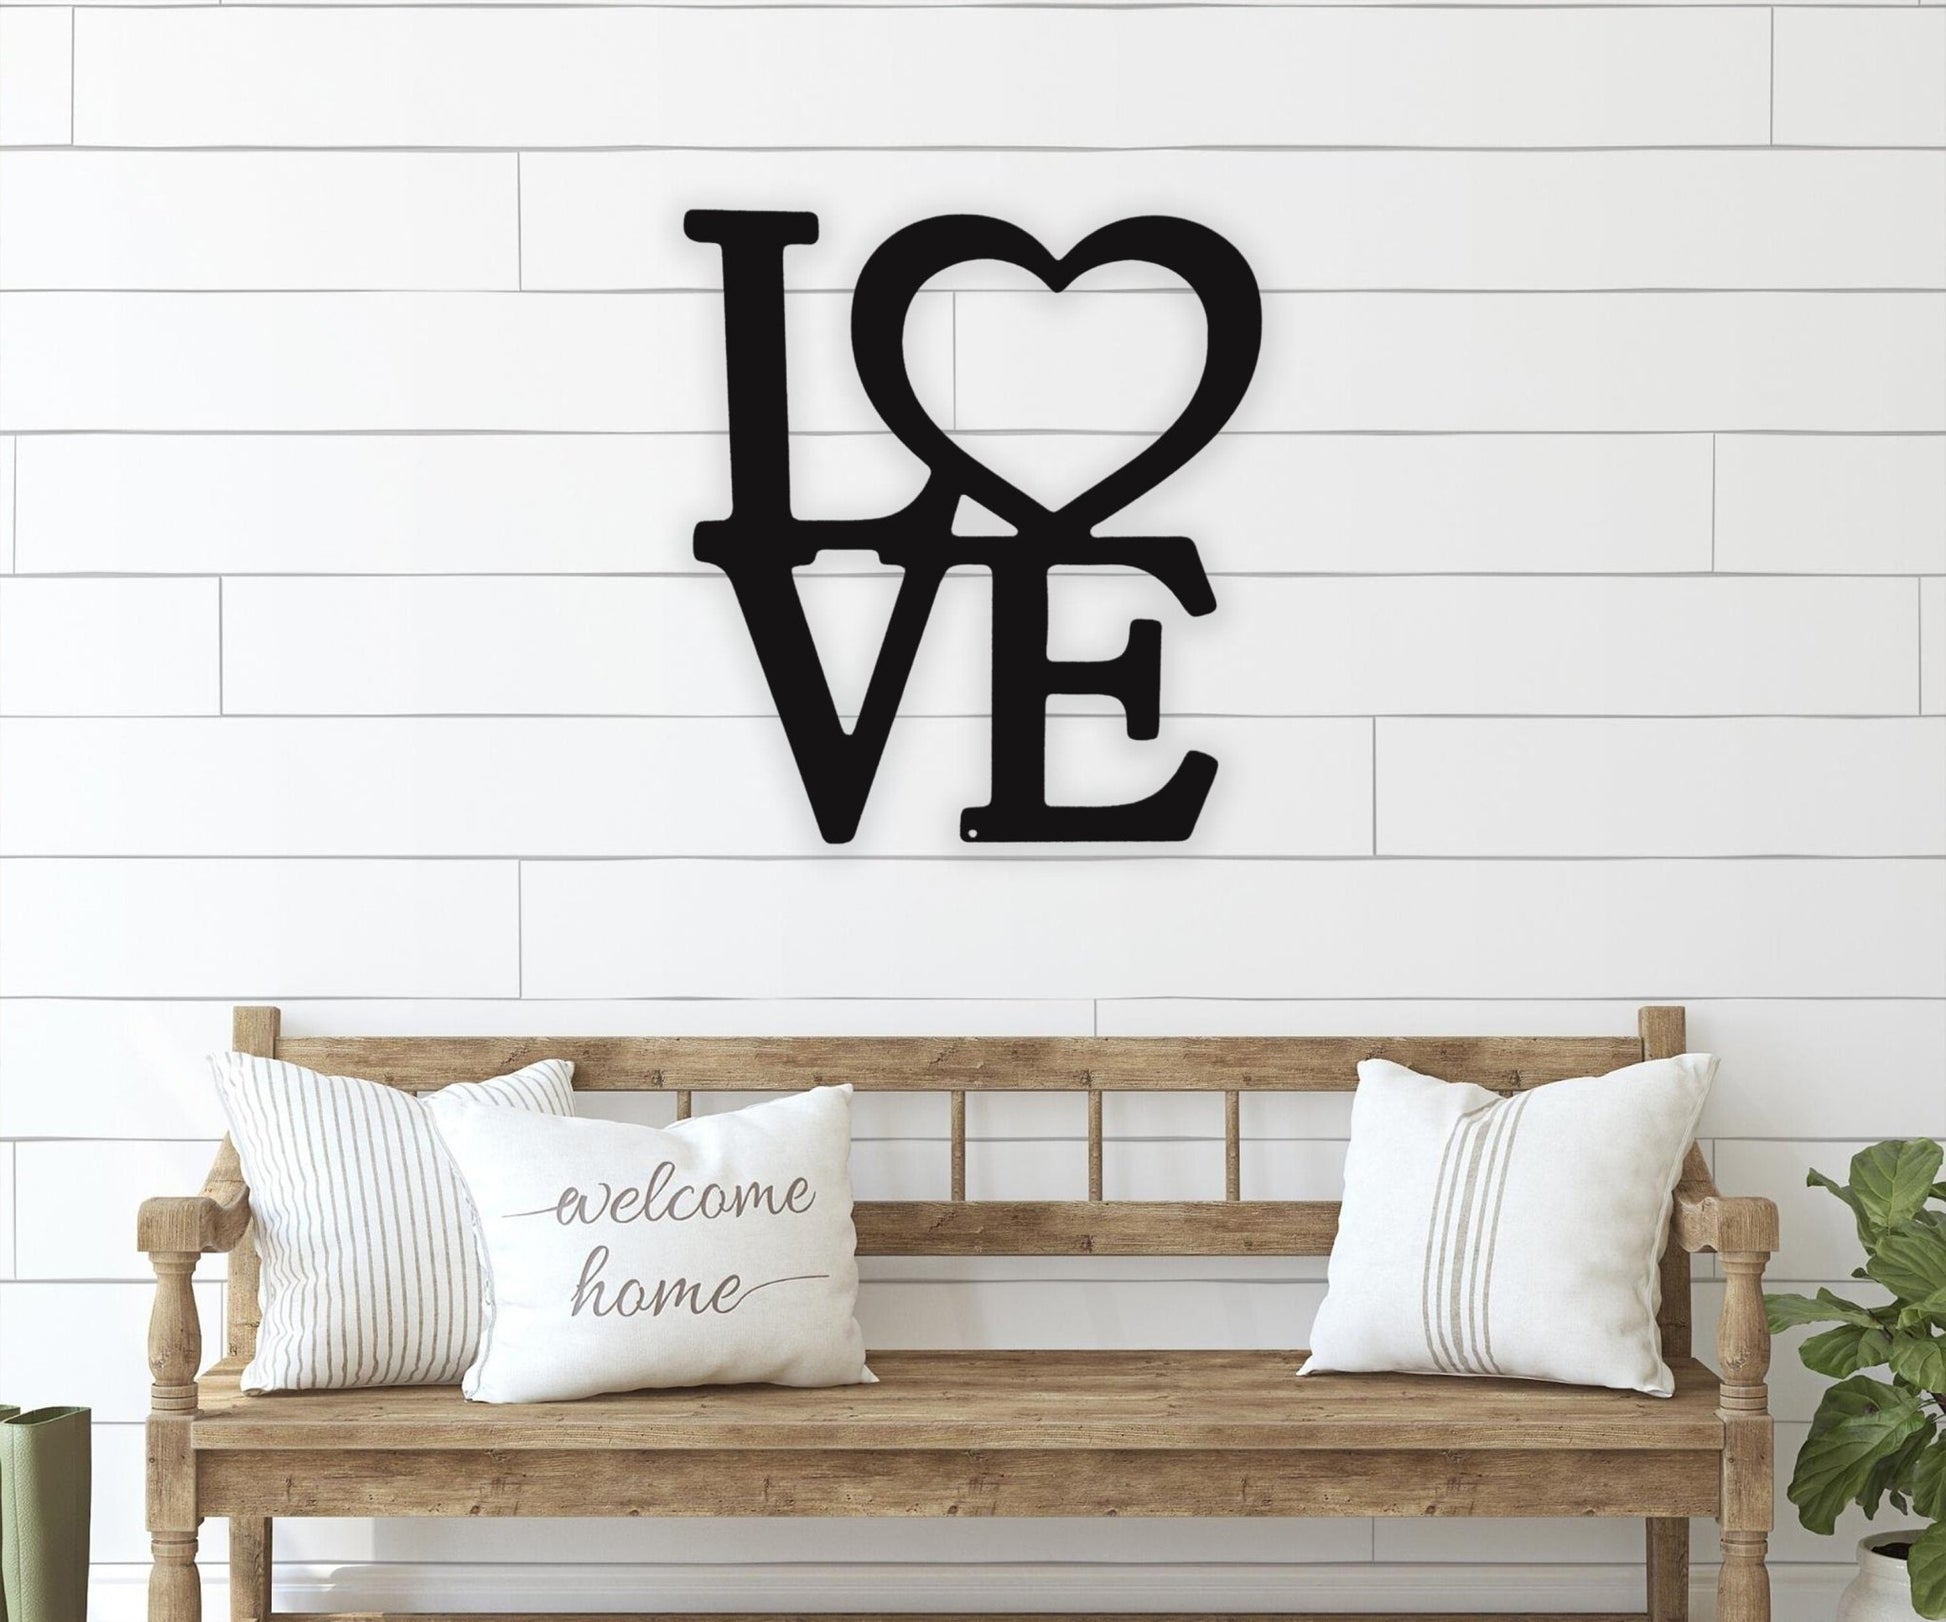 Heart With Love Metal Sign - Metal Wall Art Decor for Romantic Home Decor - Stylinsoul